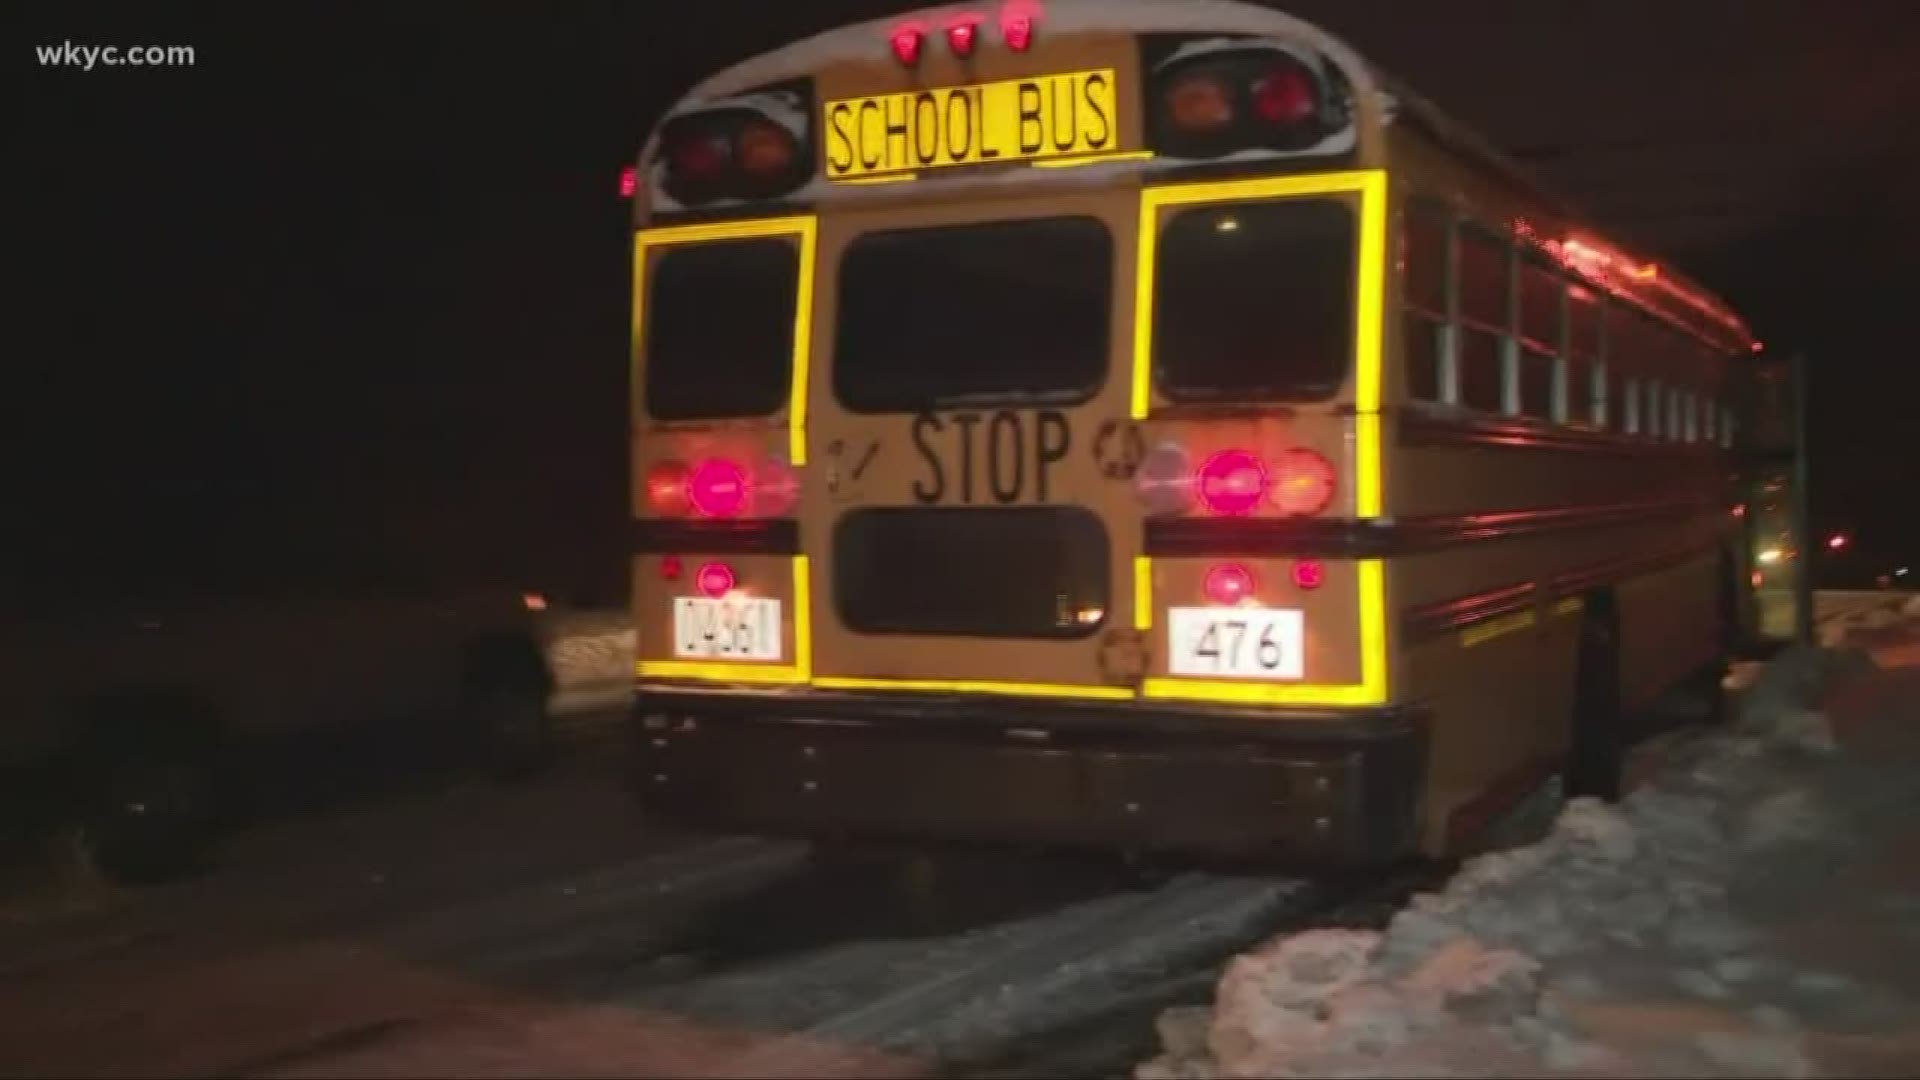 Jan. 24, 2019: It was another difficult commute in the Akron area as our crews spotted a school bus stuck in slick conditions for the second day in a row.